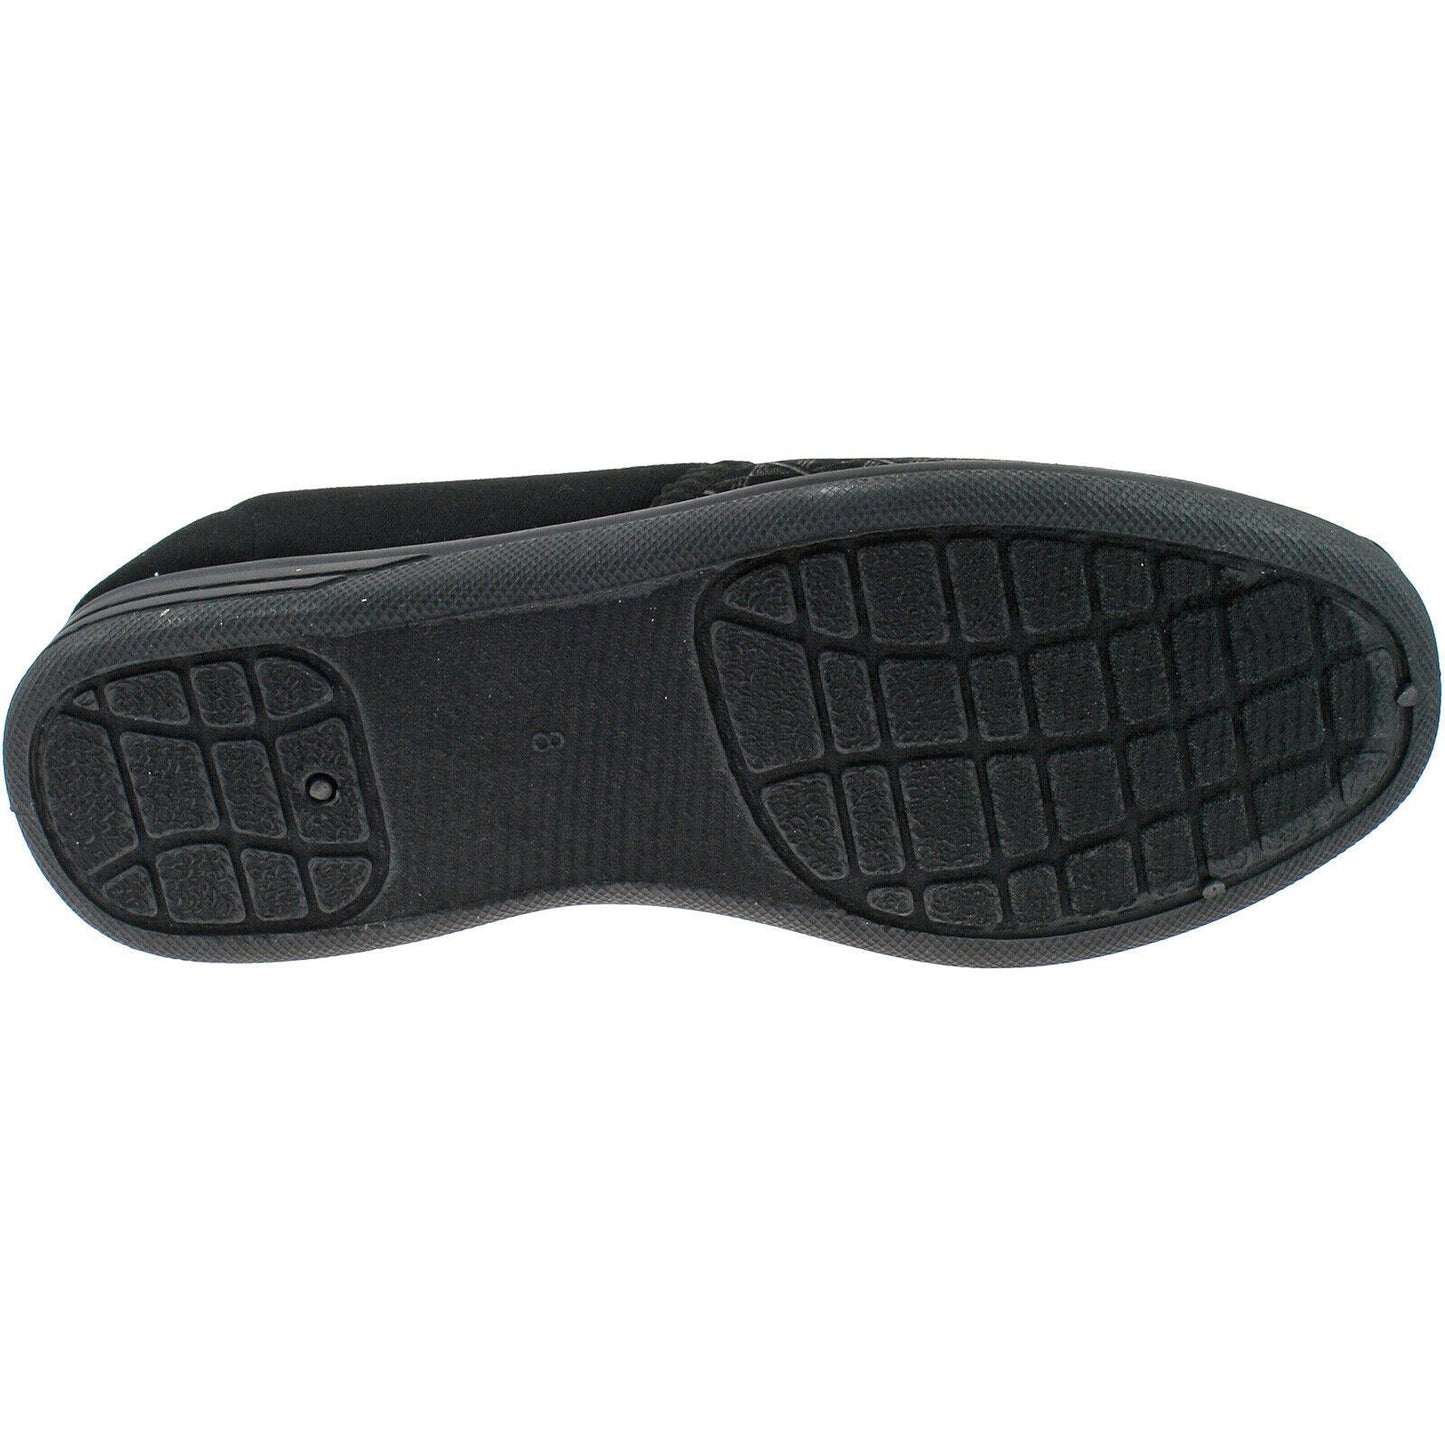 Mens Zedzzz Warm Lined Velour Double Gusset Full Slippers Black Brown MS466